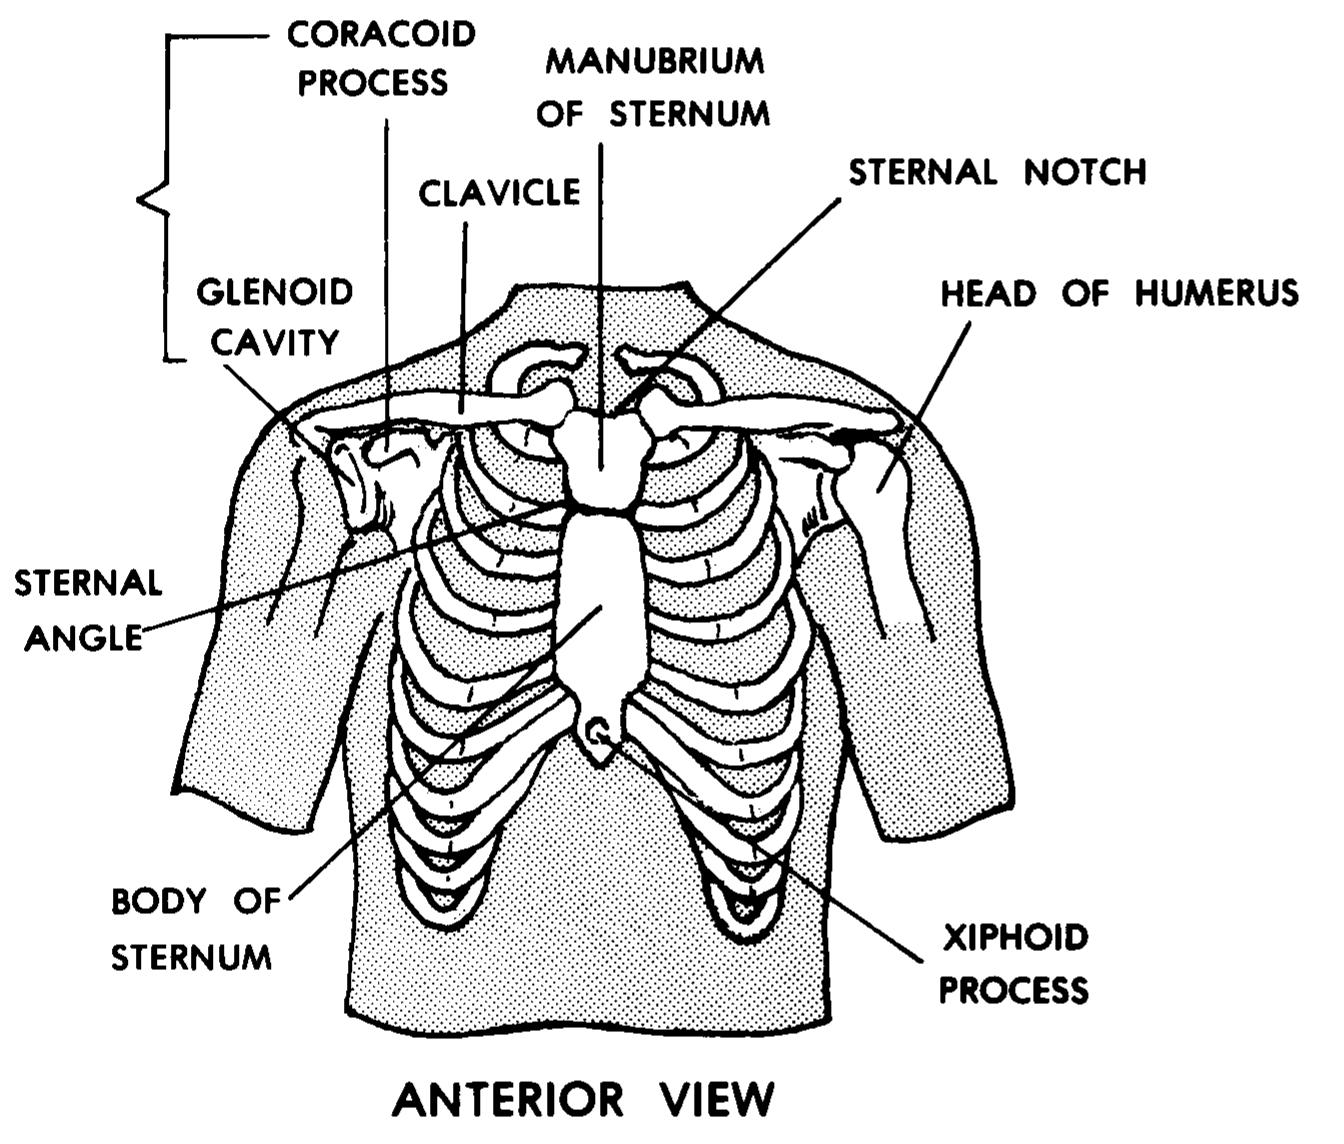 Anatomy Of Chest Thorax Anatomy Wall Cavity Organs Neurovasculature Images